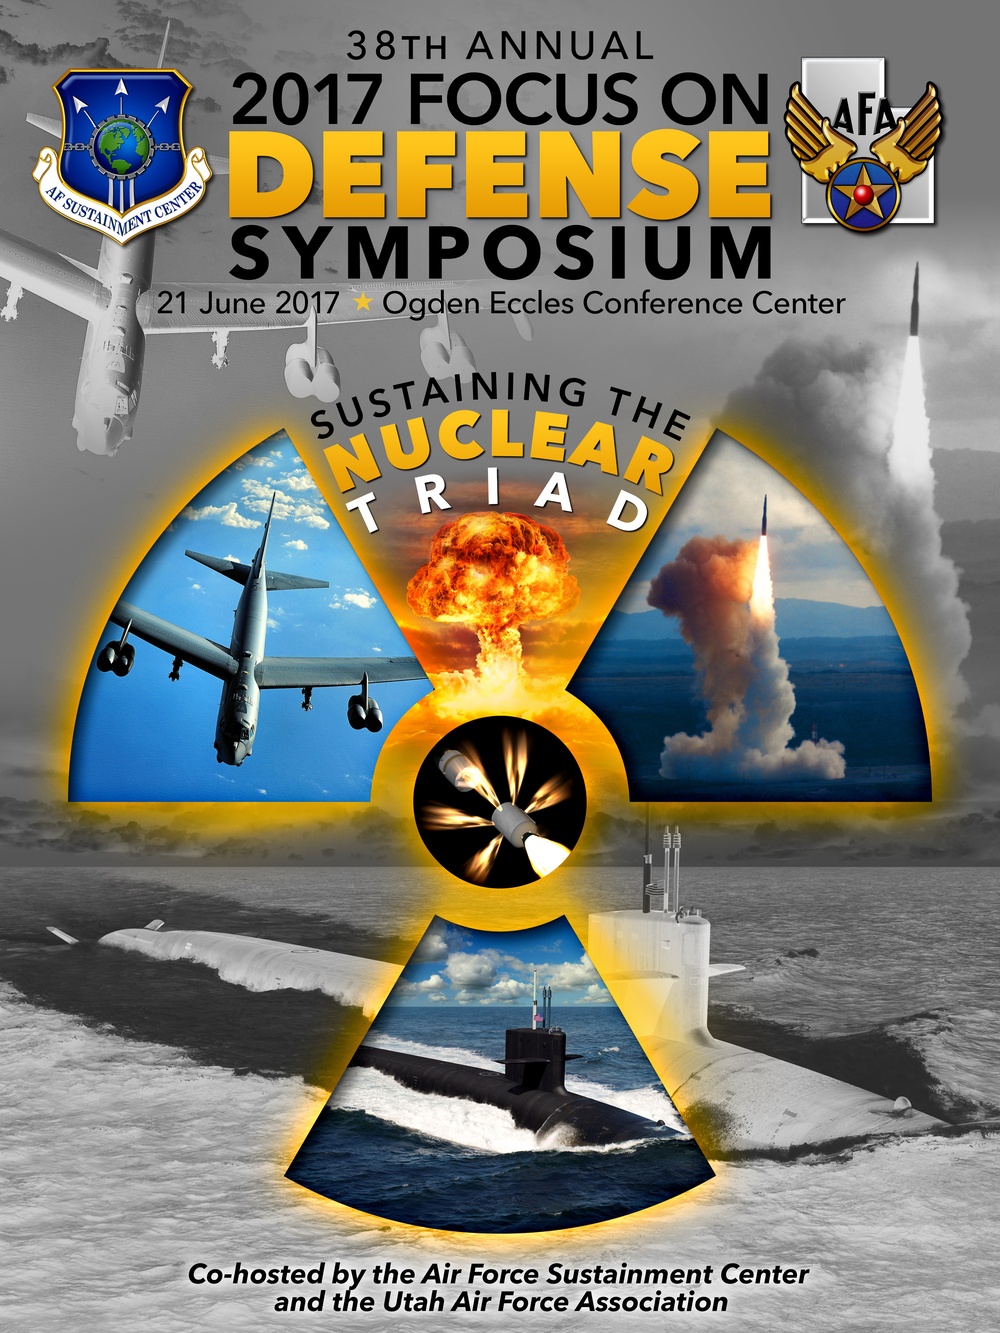 Focus on Defense Symposium program cover and poster